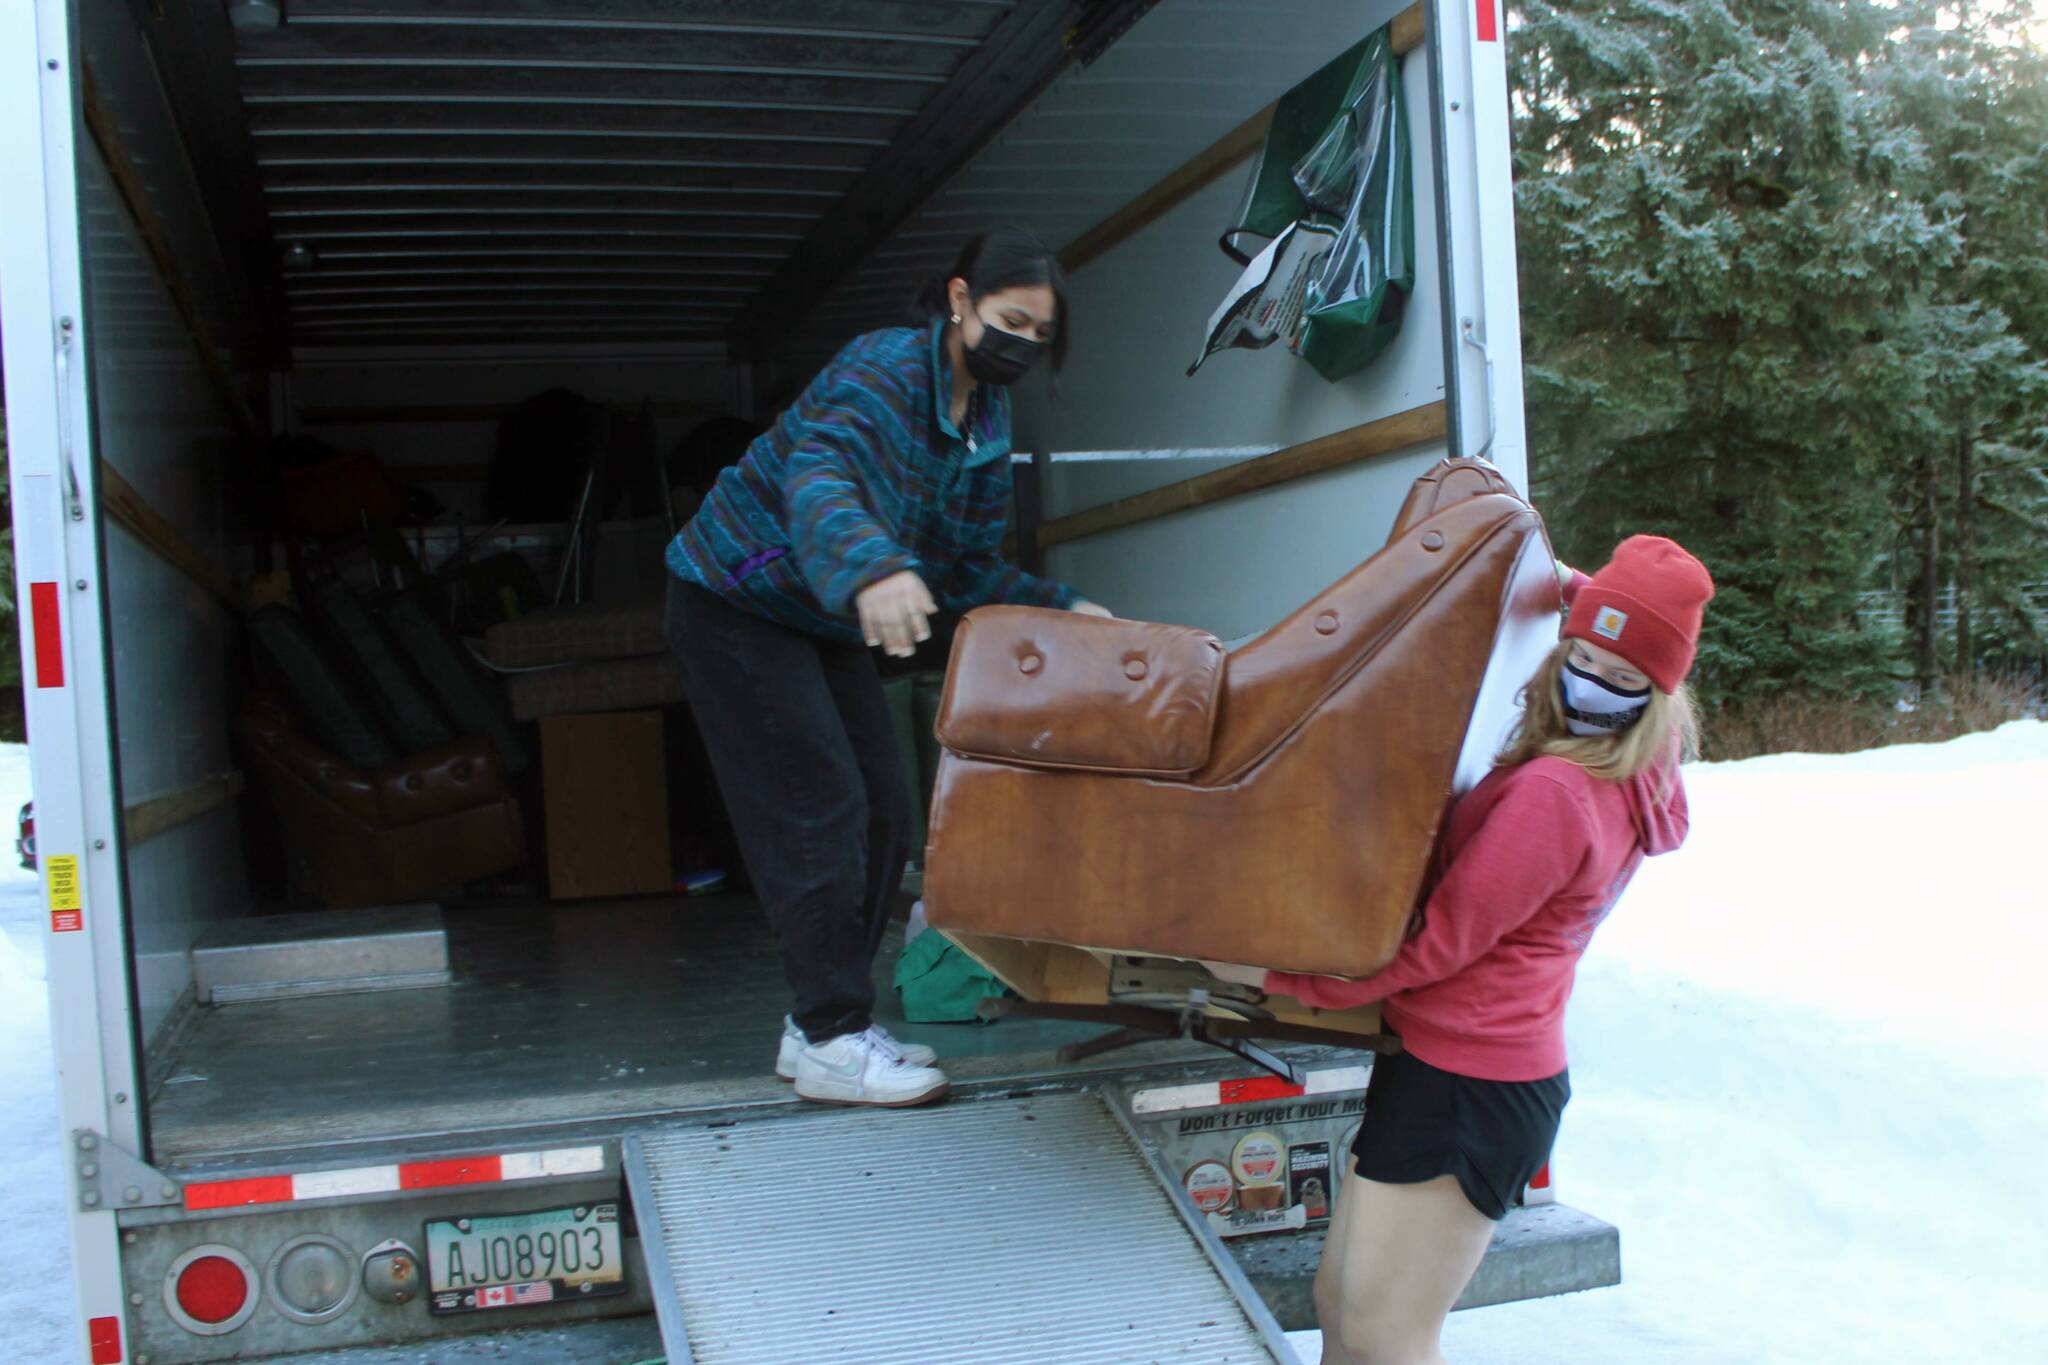 Mercedes Cordero, left, a junior at Thunder Mountain High School, and Gwen Lockwood, a senior at TMHS moved a chair at Chapel by the Lake on Jan. 17. The pair, along with about 20 other high school students, spent part of their Martin Luther King Jr. holiday chipping in with other volunteers readying the church to receive students from Riverbend School. (Dana Zigmund/Juneau Empire)